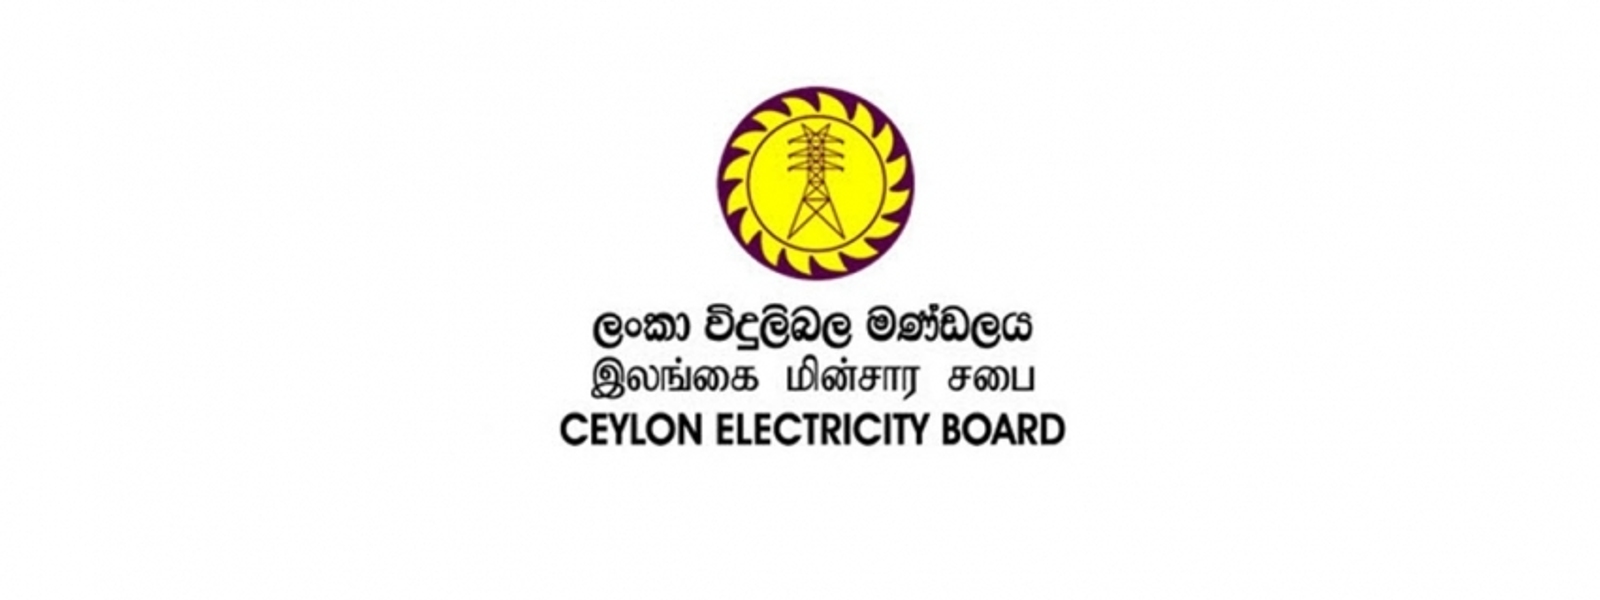 CEB reforms from political parties